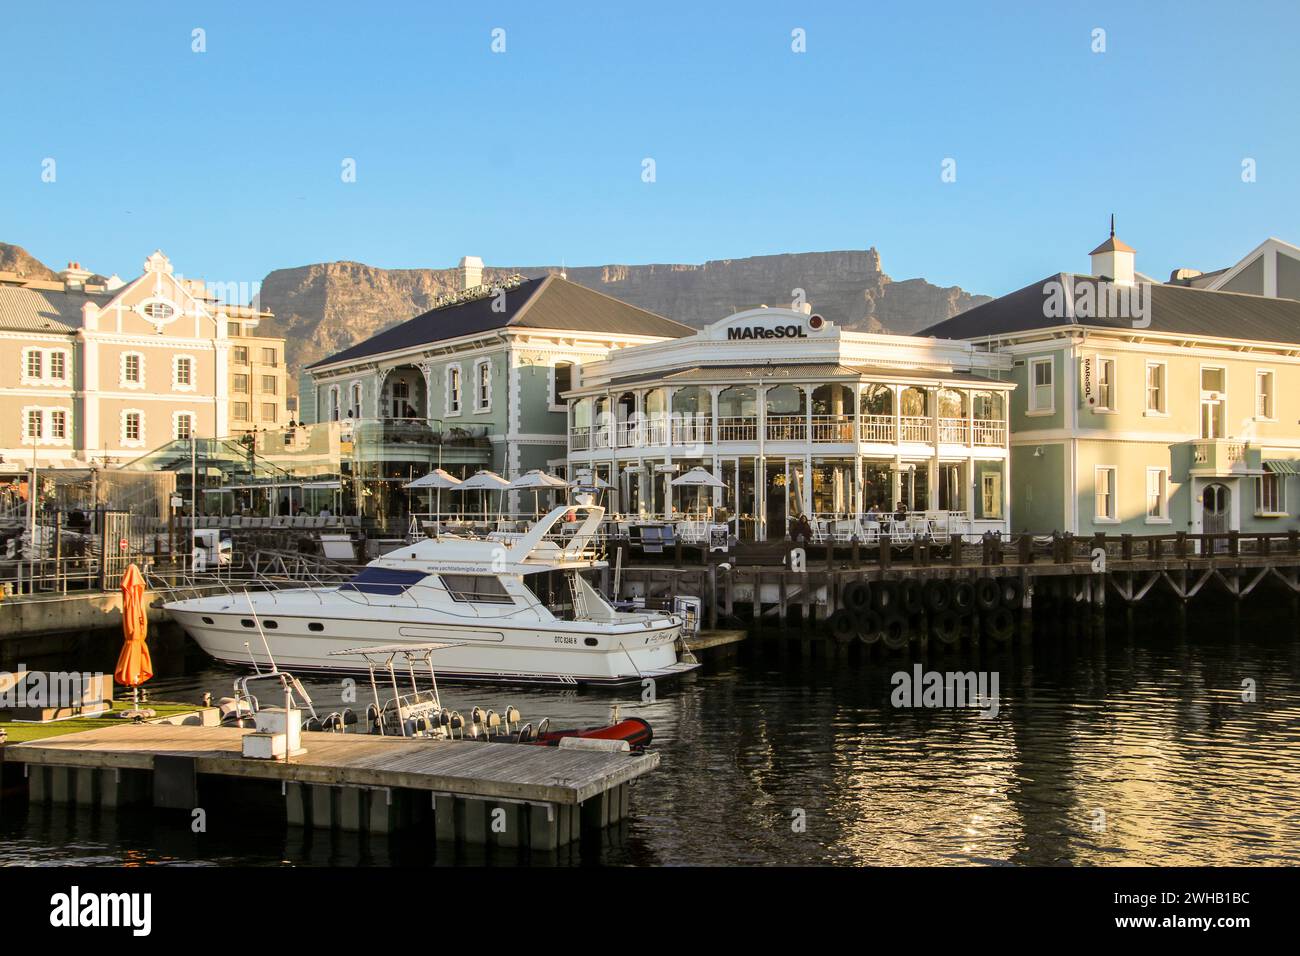 MAReSOL Portuguese restaurant, Old Pierhead Square, V&A Waterfront, Cape Town, Table Bay, Western Cape Province, South Africa Stock Photo